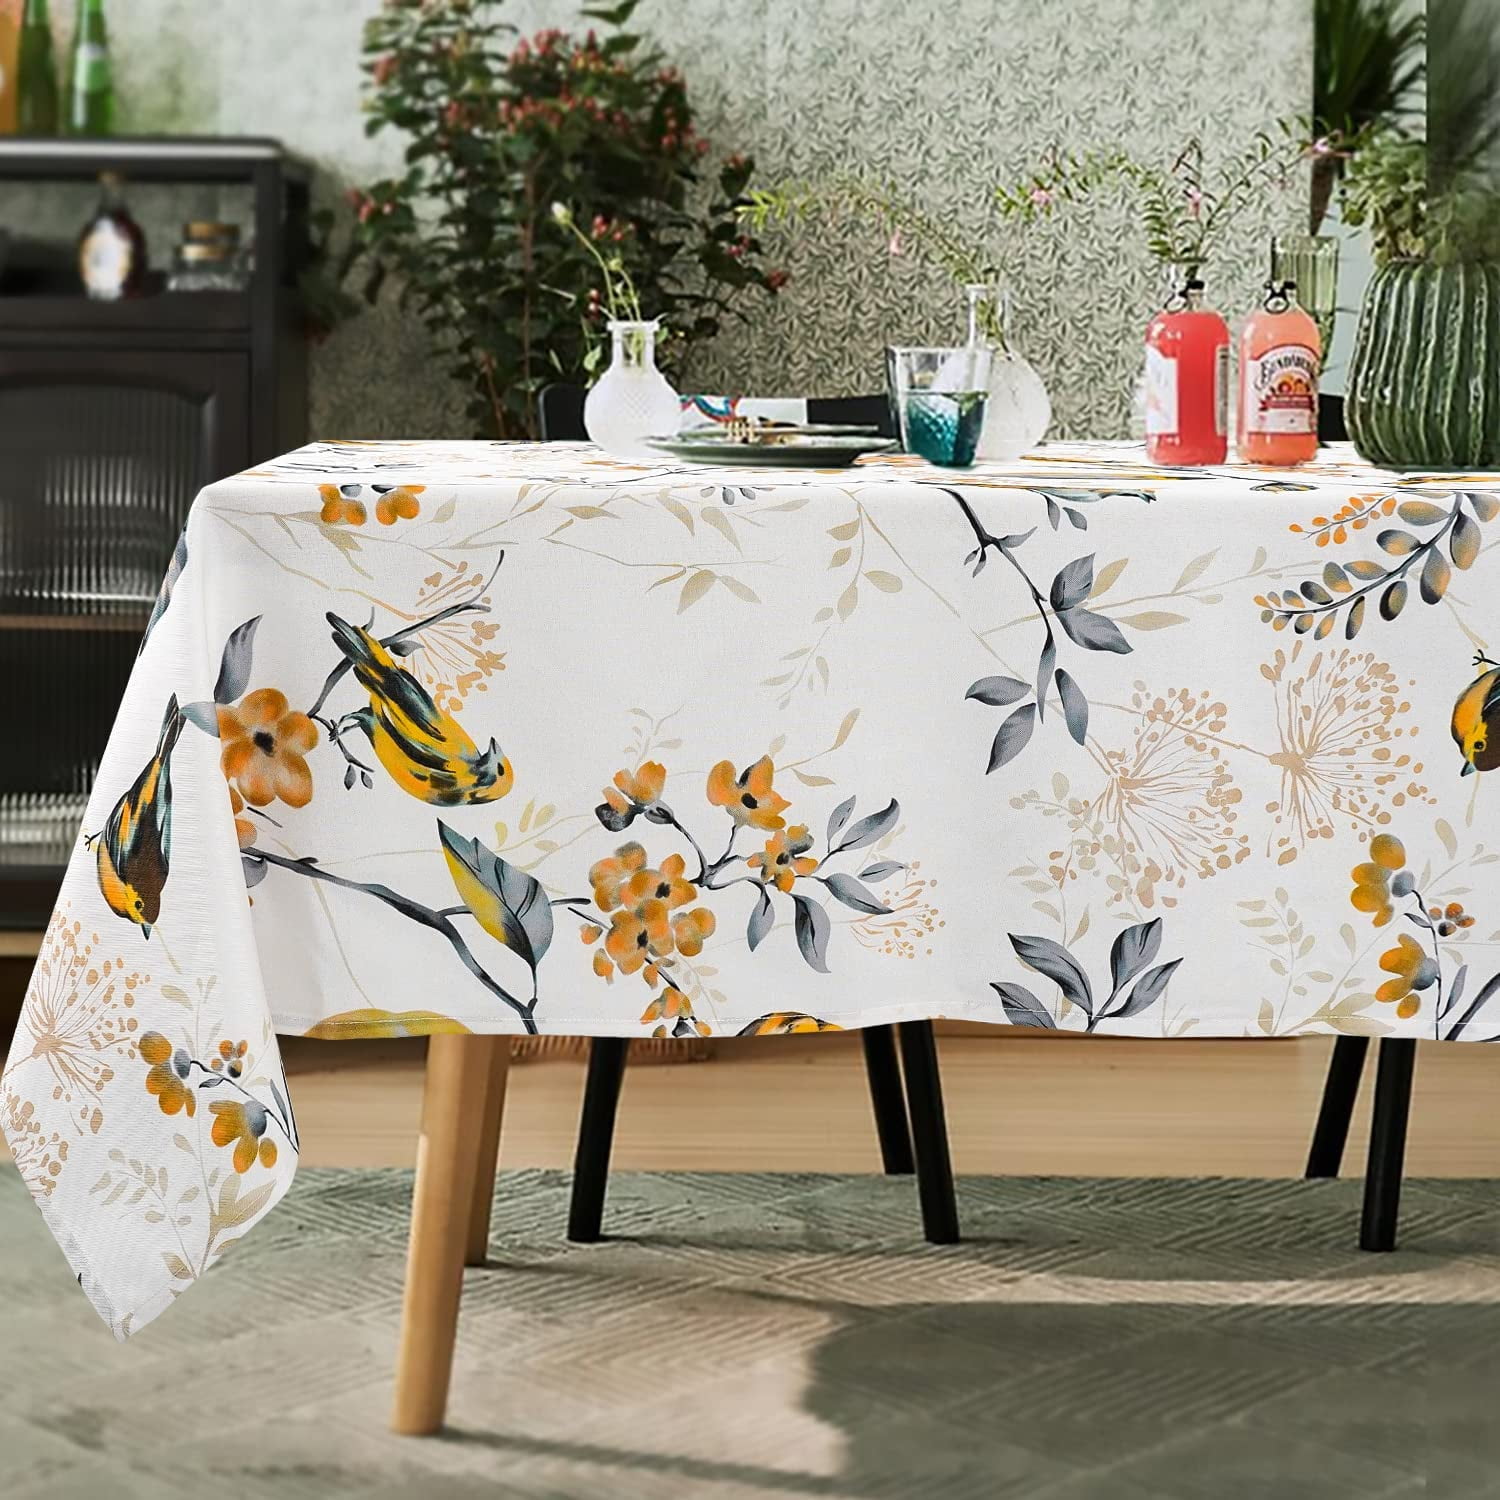 Bird Tablecloth Rectangular Table Cloth 60 X 84 Inch for Dining Room ...